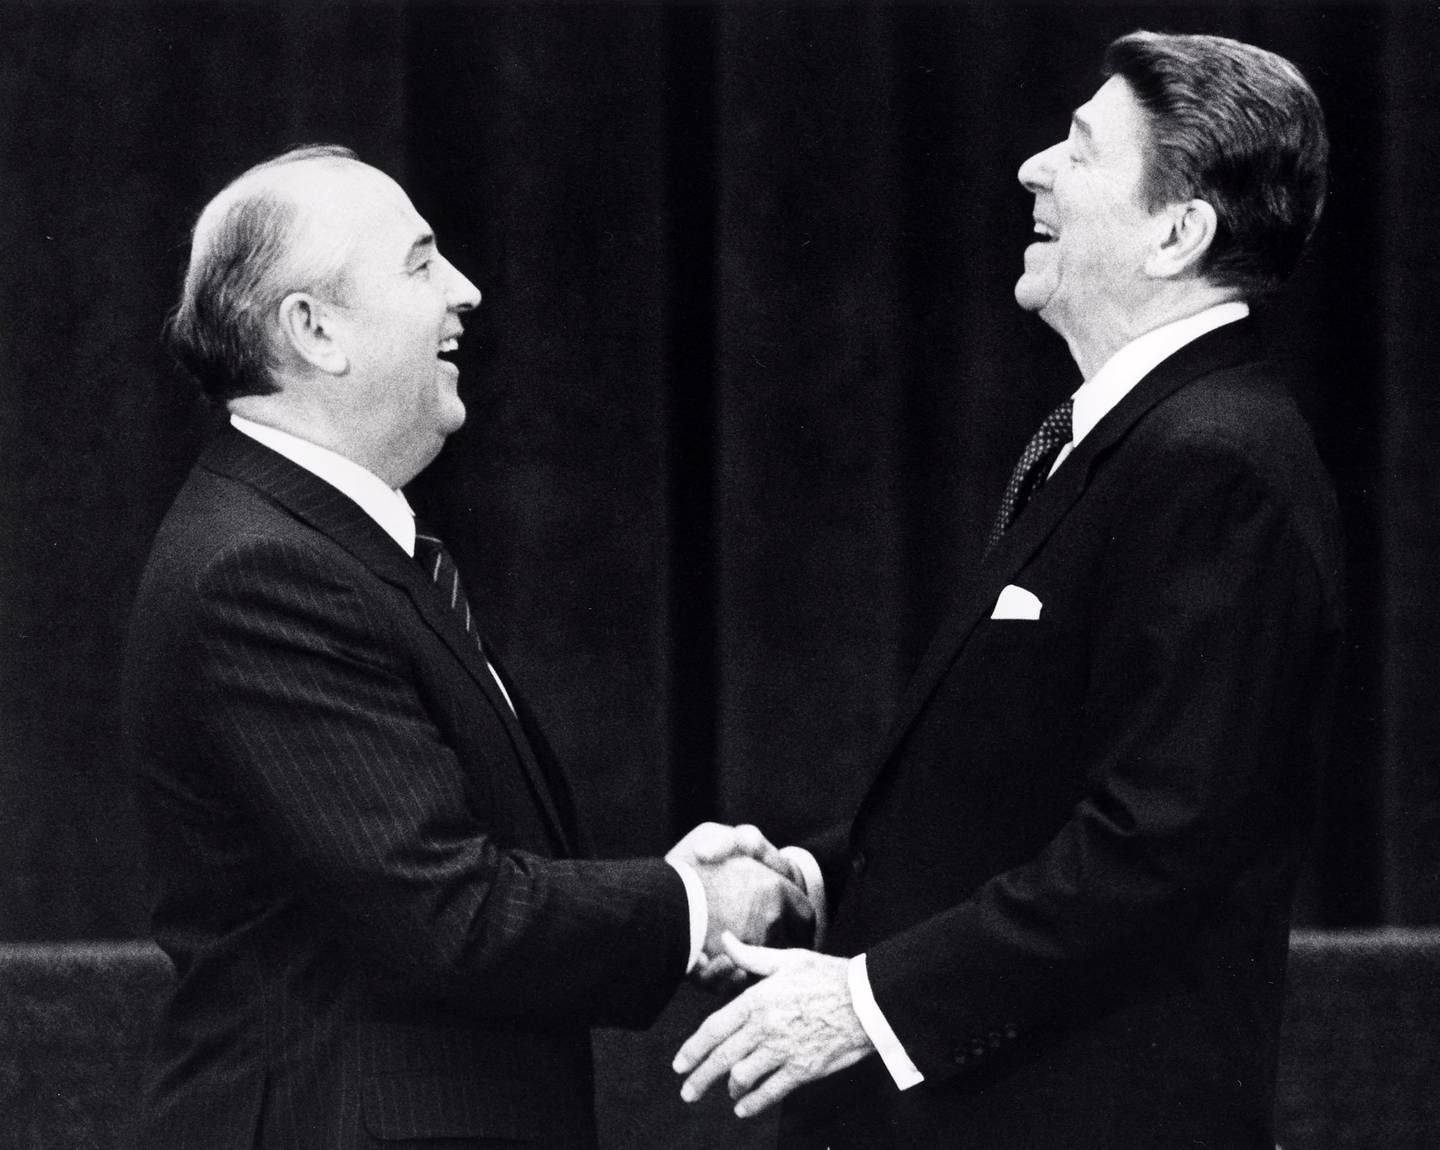 Former US President Ronald Reagan at his first meeting with former Soviet leader Mikhail Gorbachev in Geneva, Switzerland, in 1985. Reuters